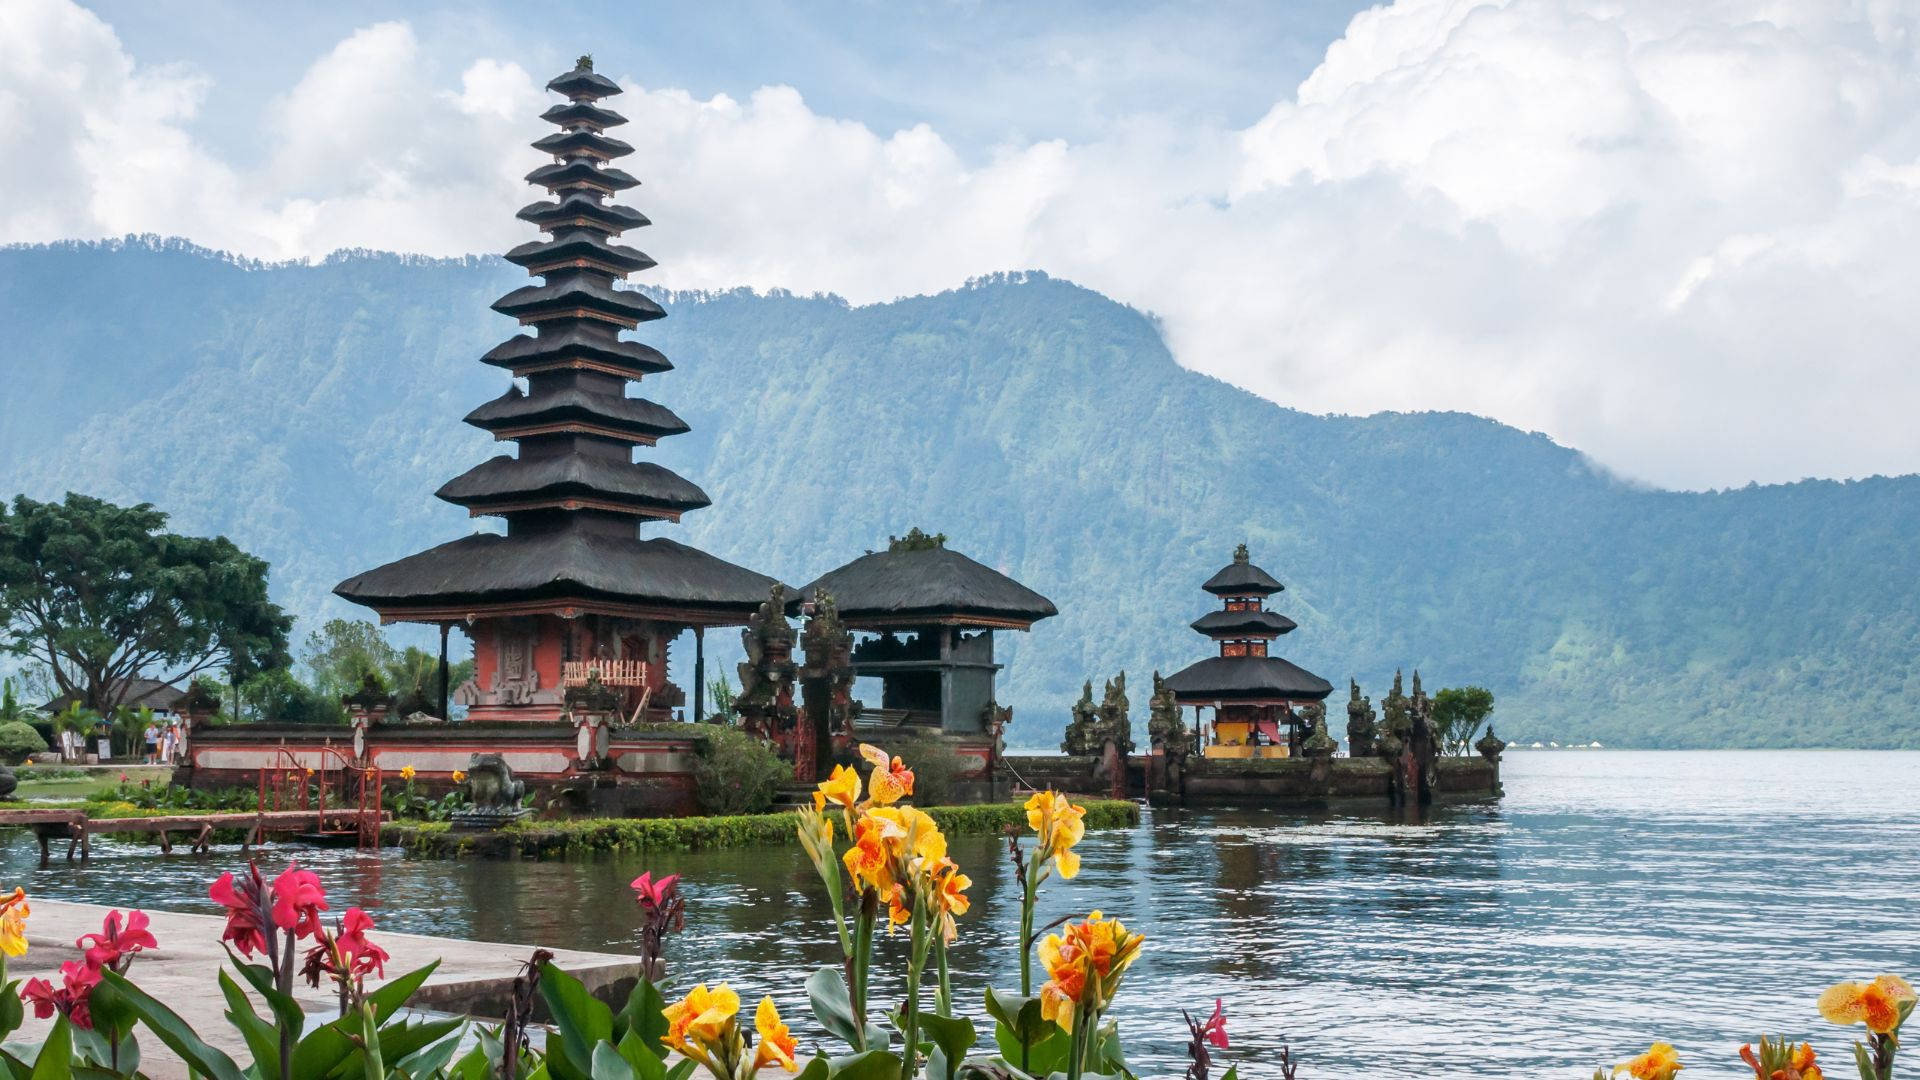 Bali Photos Download The BEST Free Bali Stock Photos  HD Images